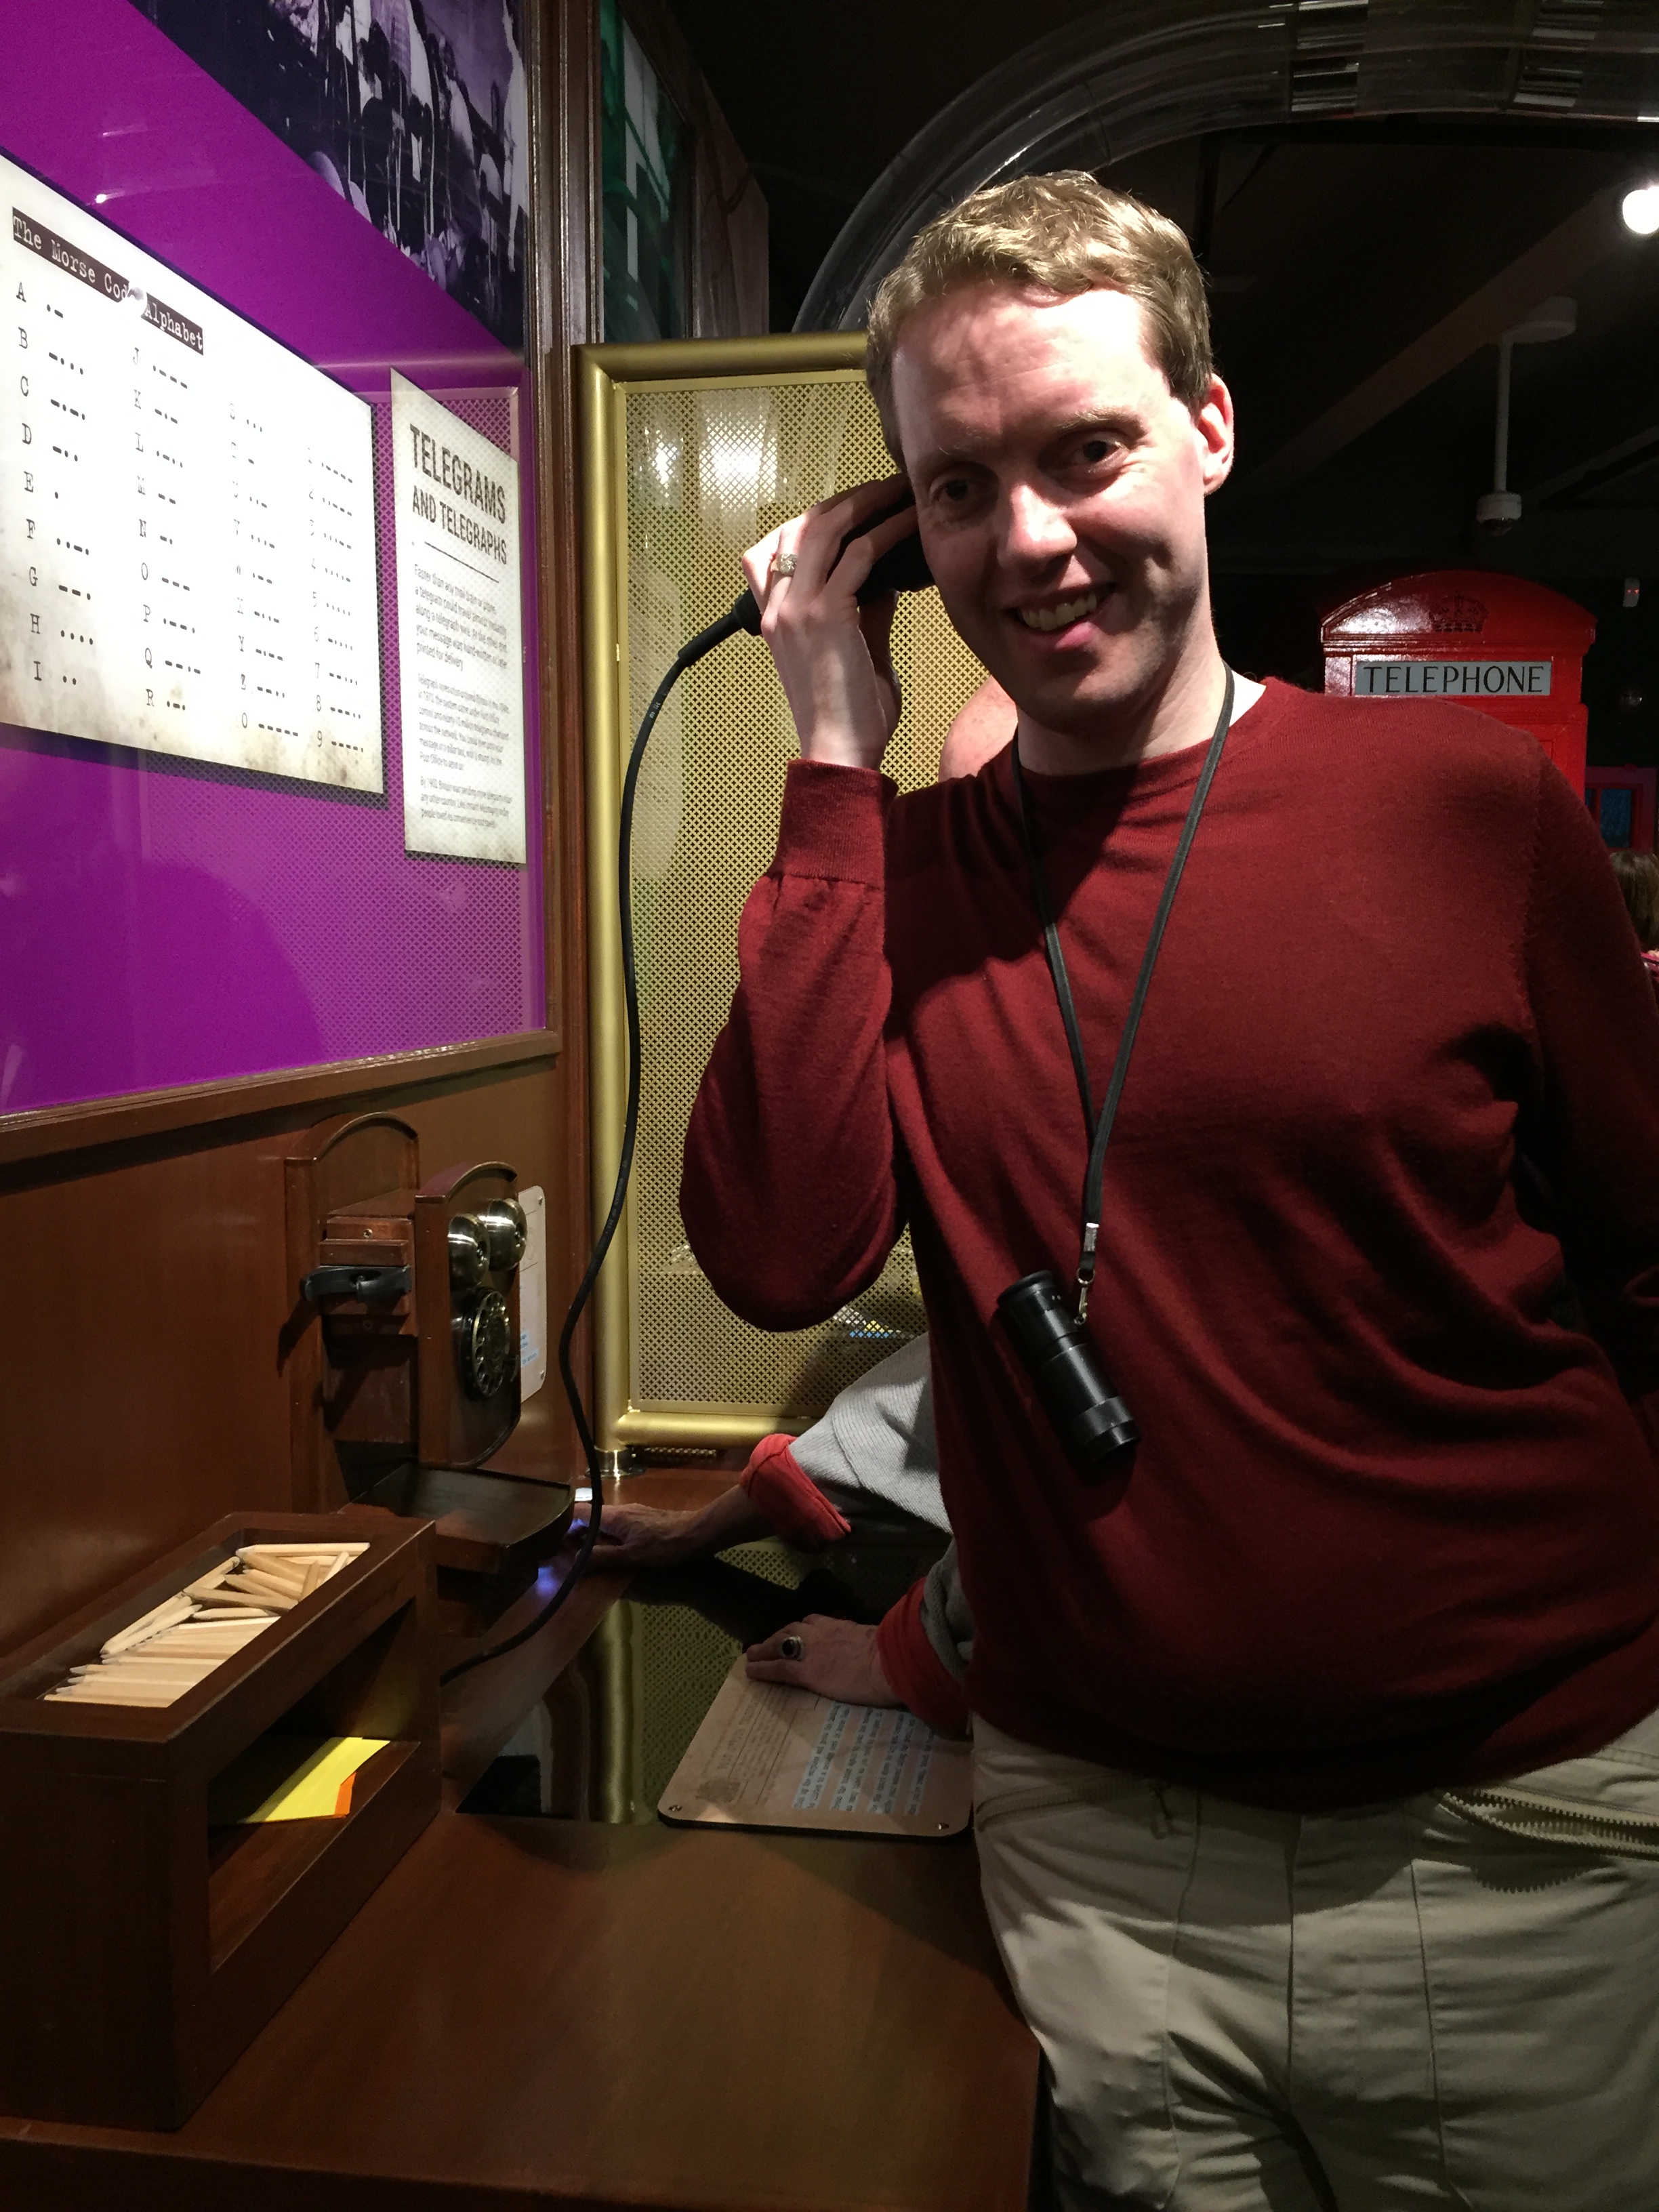 Glen smiling as he holds the receiver of a morse code device to his ear in a museum.